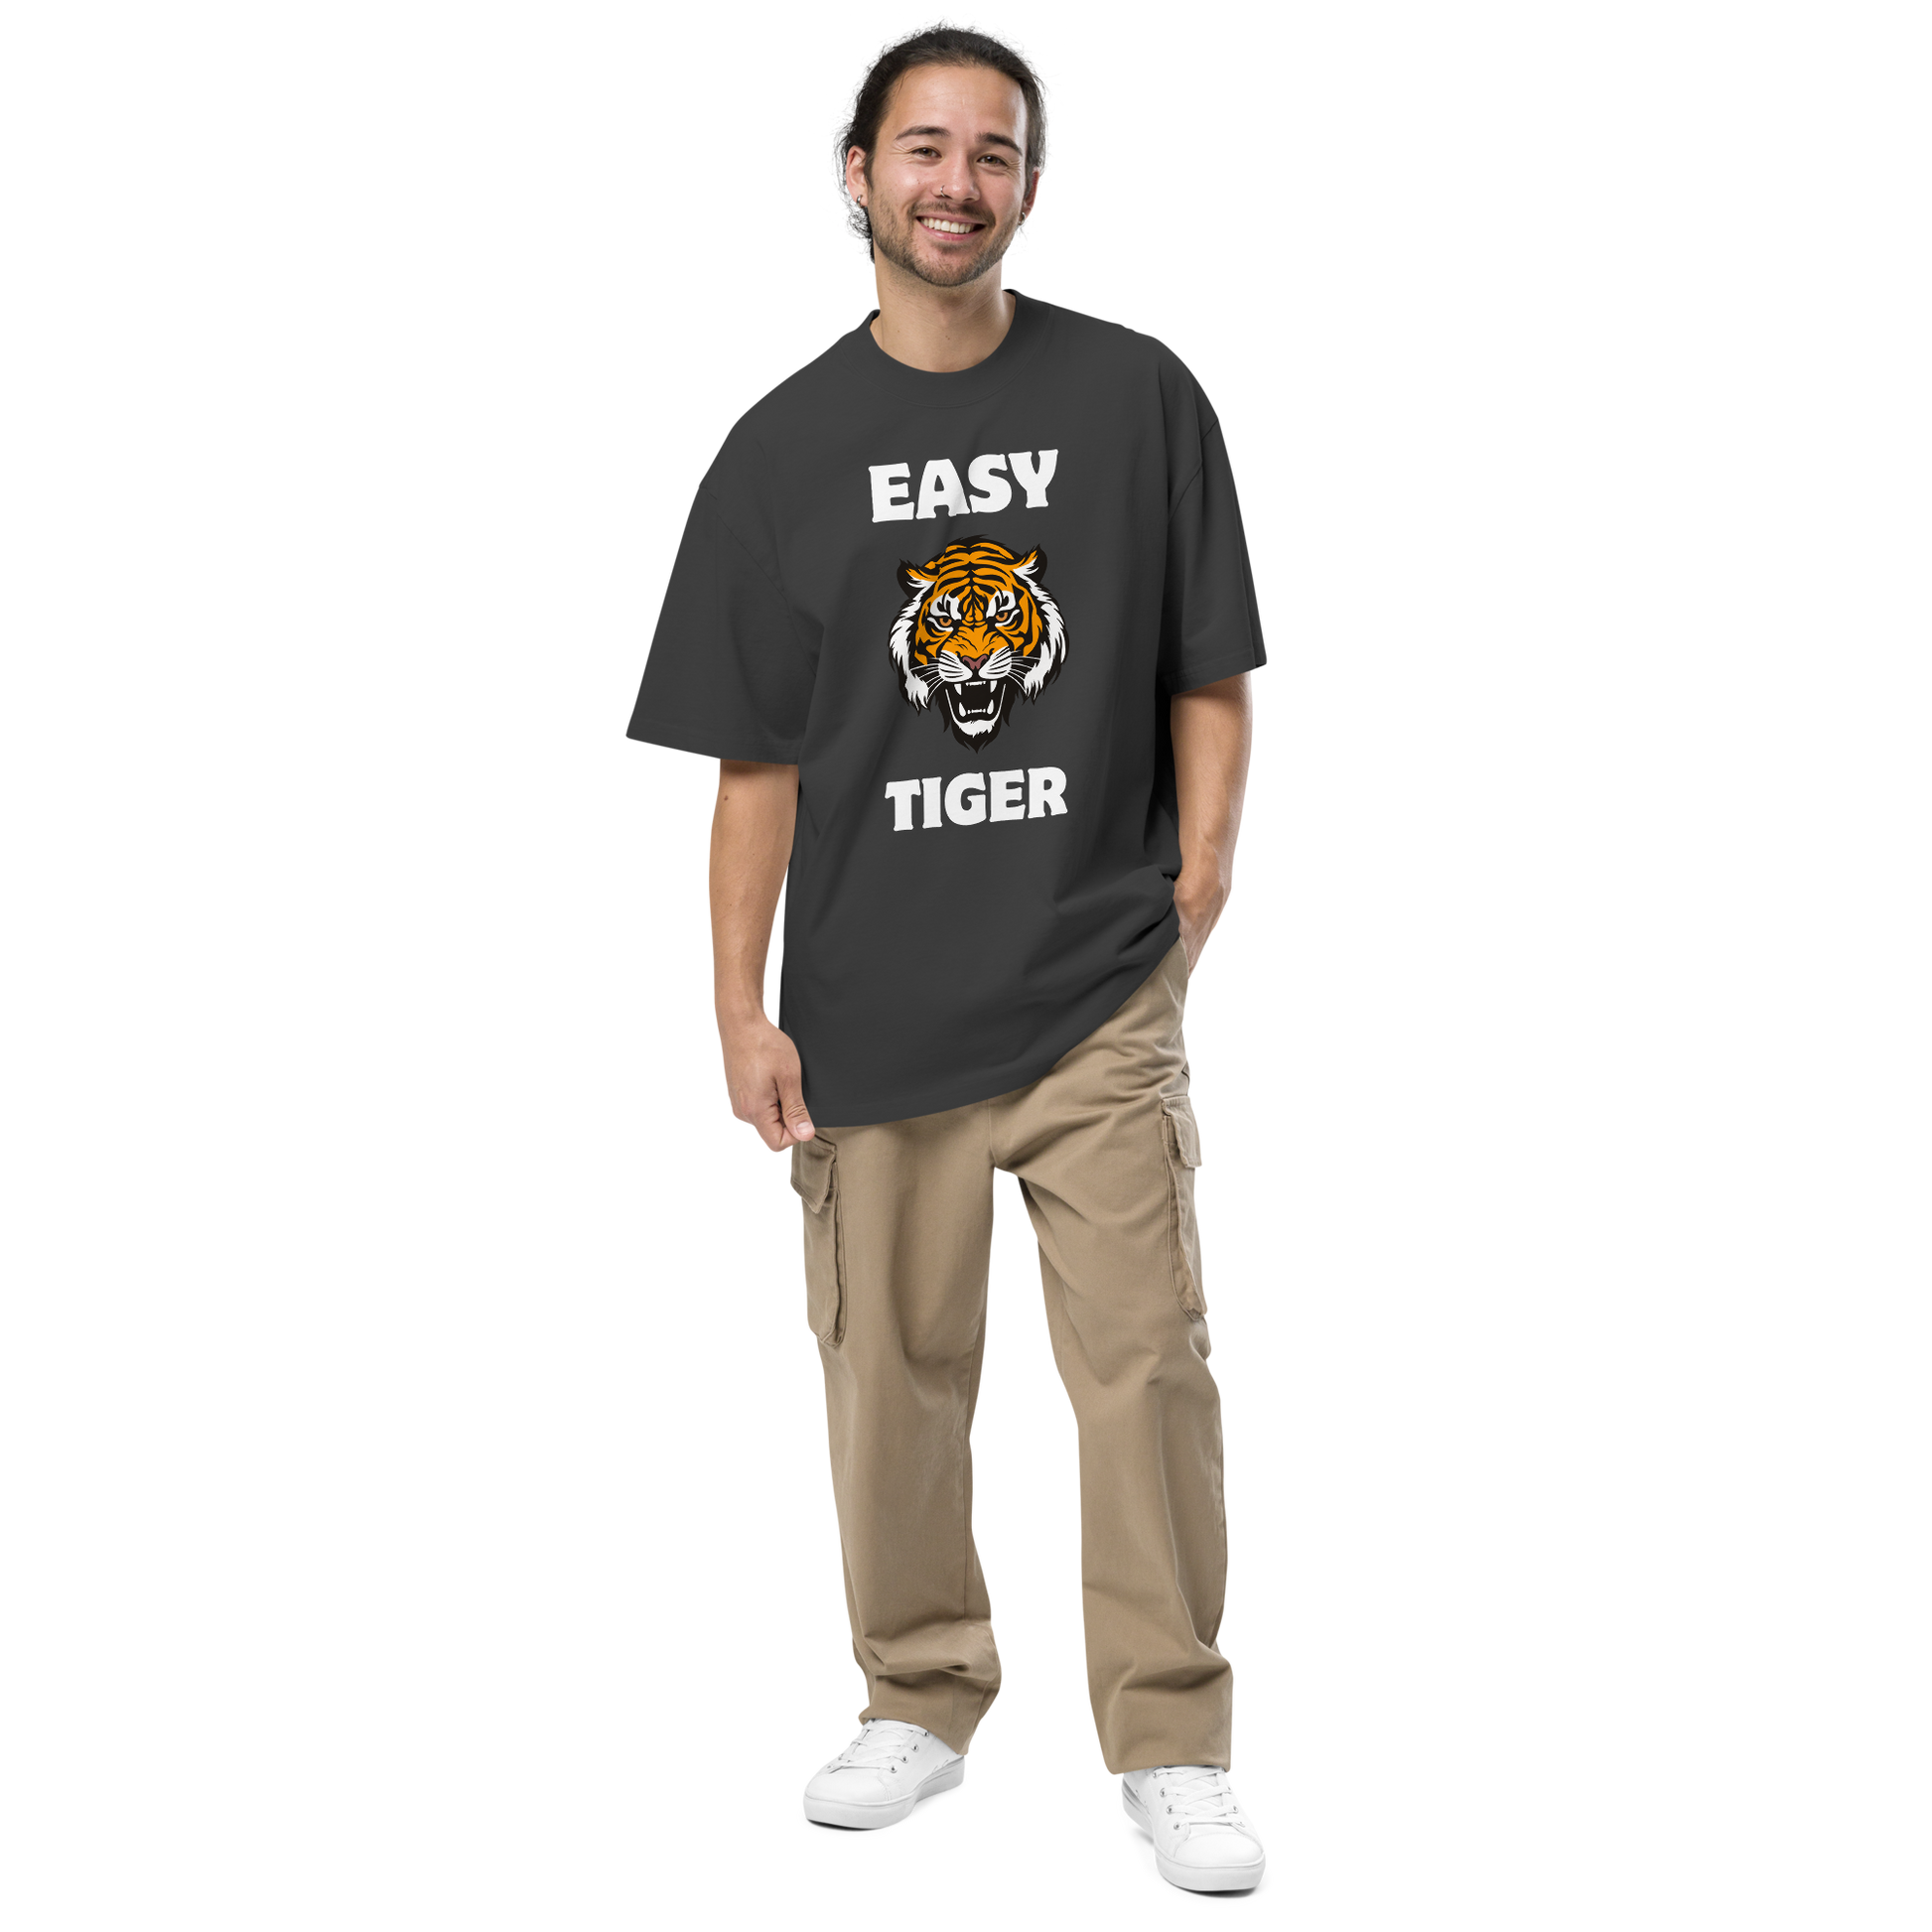 Man wearing a Faded Black Tiger Oversized T-Shirt featuring a Easy Tiger graphic on the chest - Funny Graphic Tiger Oversized Tees - Boozy Fox